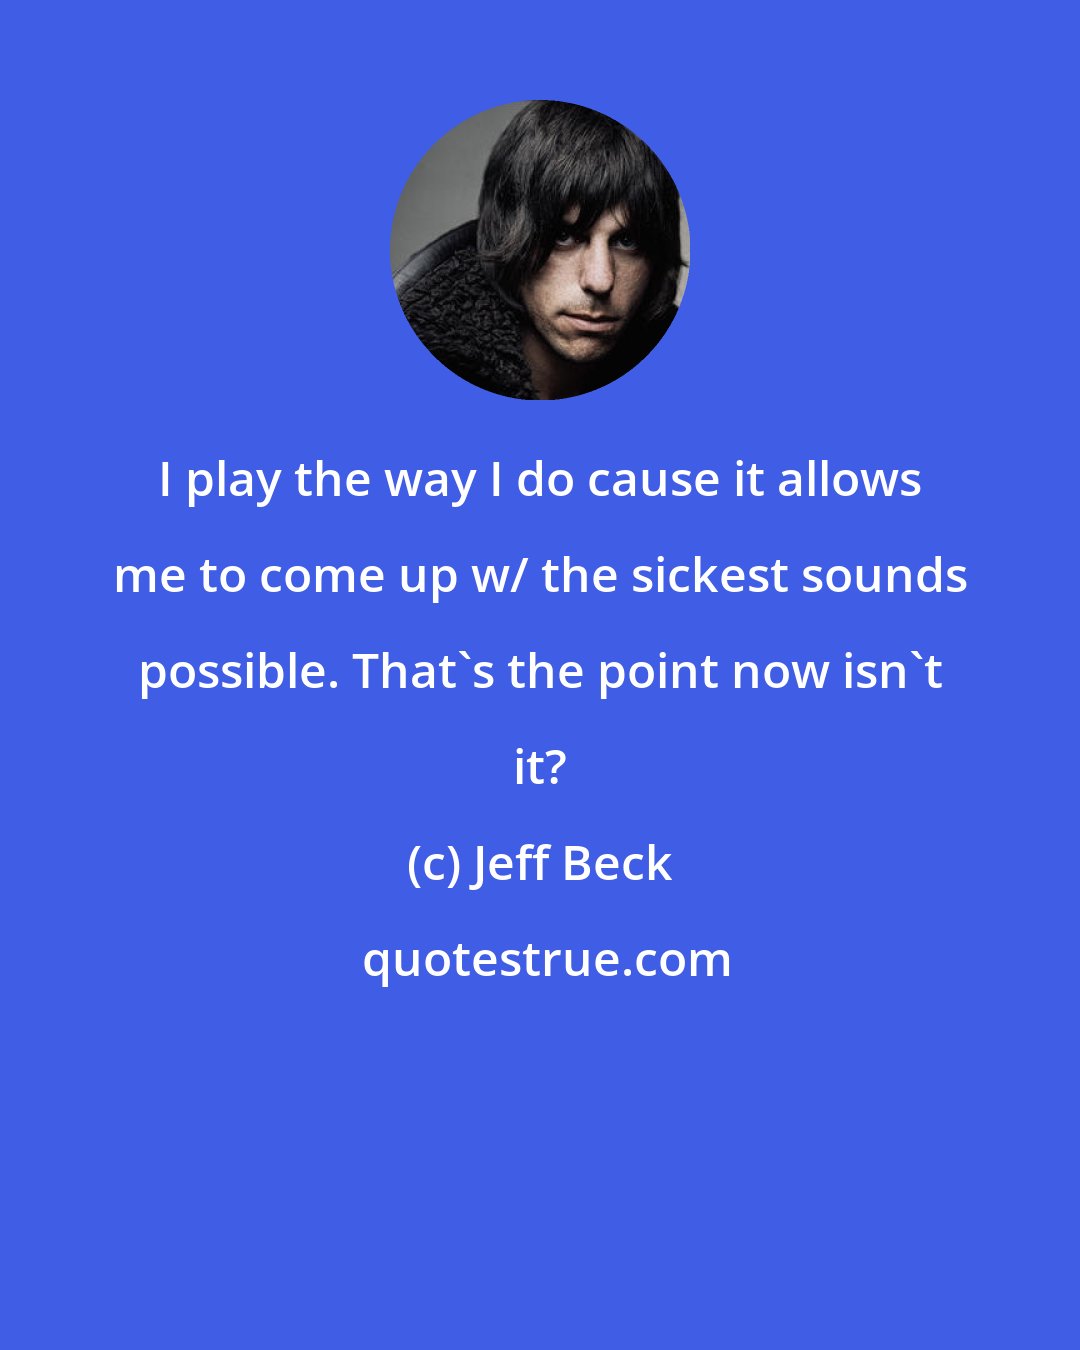 Jeff Beck: I play the way I do cause it allows me to come up w/ the sickest sounds possible. That's the point now isn't it?